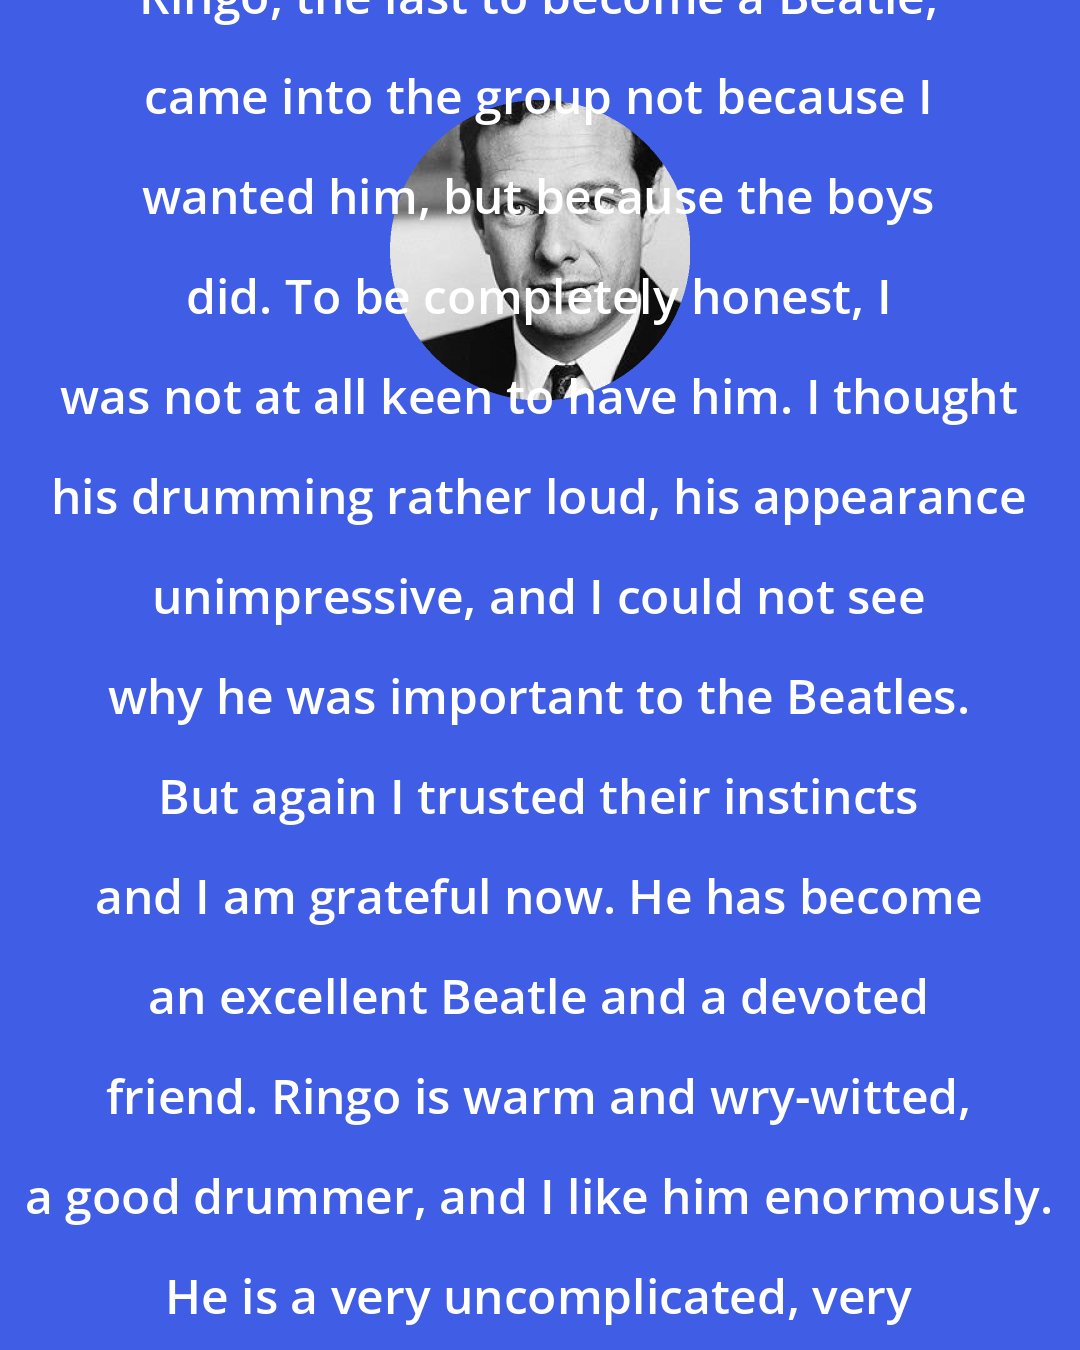 Brian Epstein: Ringo, the last to become a Beatle, came into the group not because I wanted him, but because the boys did. To be completely honest, I was not at all keen to have him. I thought his drumming rather loud, his appearance unimpressive, and I could not see why he was important to the Beatles. But again I trusted their instincts and I am grateful now. He has become an excellent Beatle and a devoted friend. Ringo is warm and wry-witted, a good drummer, and I like him enormously. He is a very uncomplicated, very nice young man.